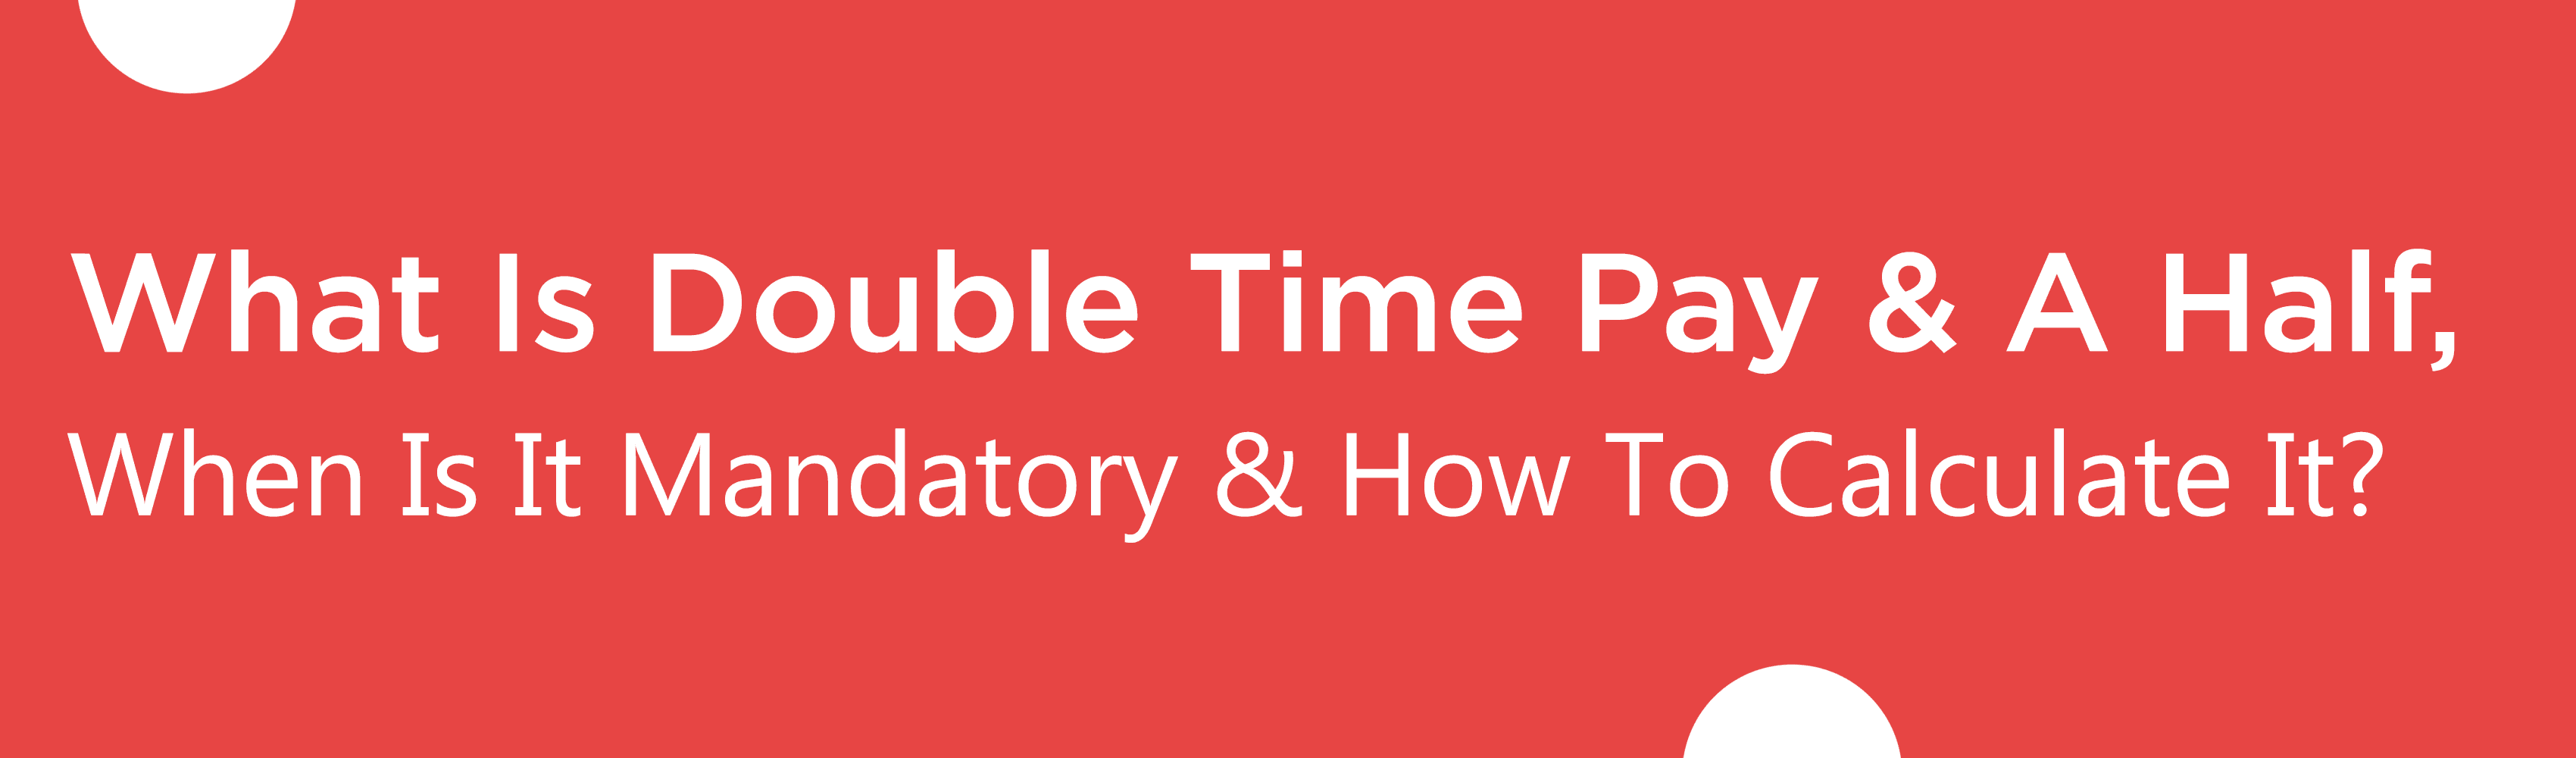 What Is Double Time Pay & A Half, When Is It Mandatory & How To Calculate It?